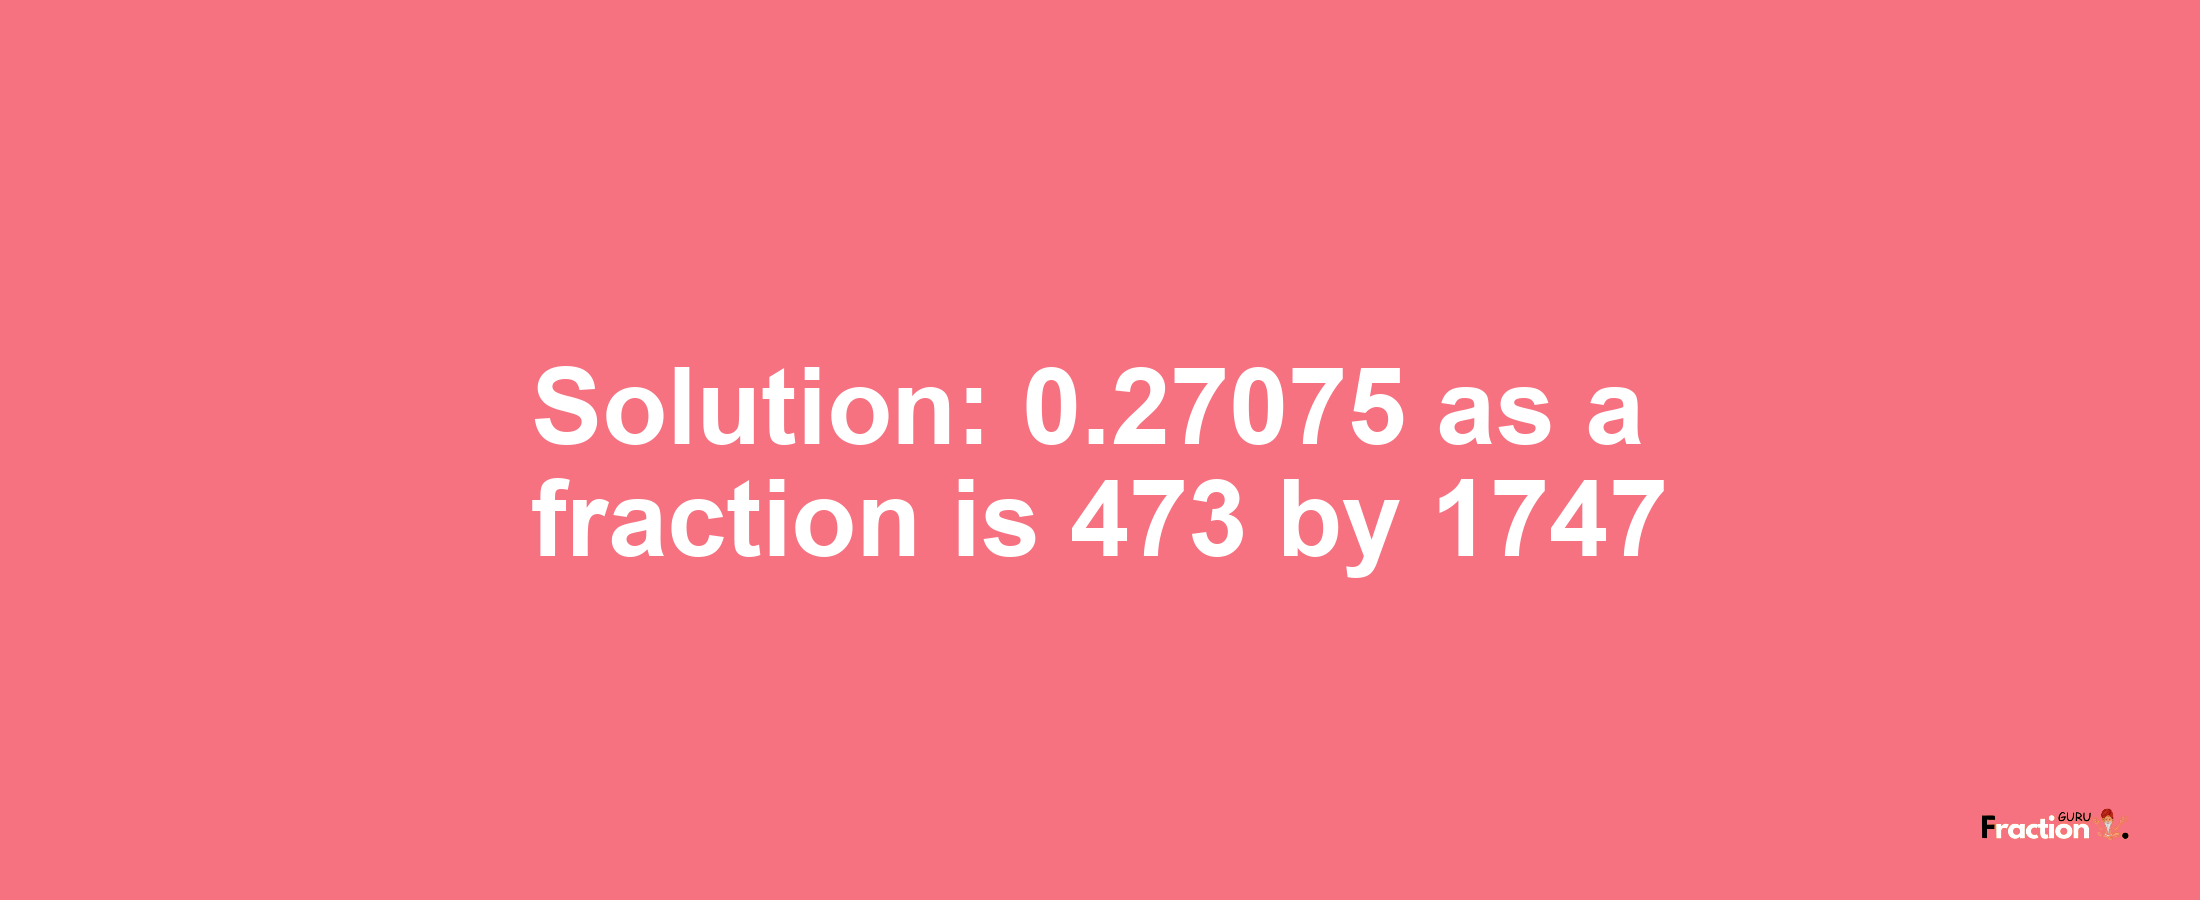 Solution:0.27075 as a fraction is 473/1747